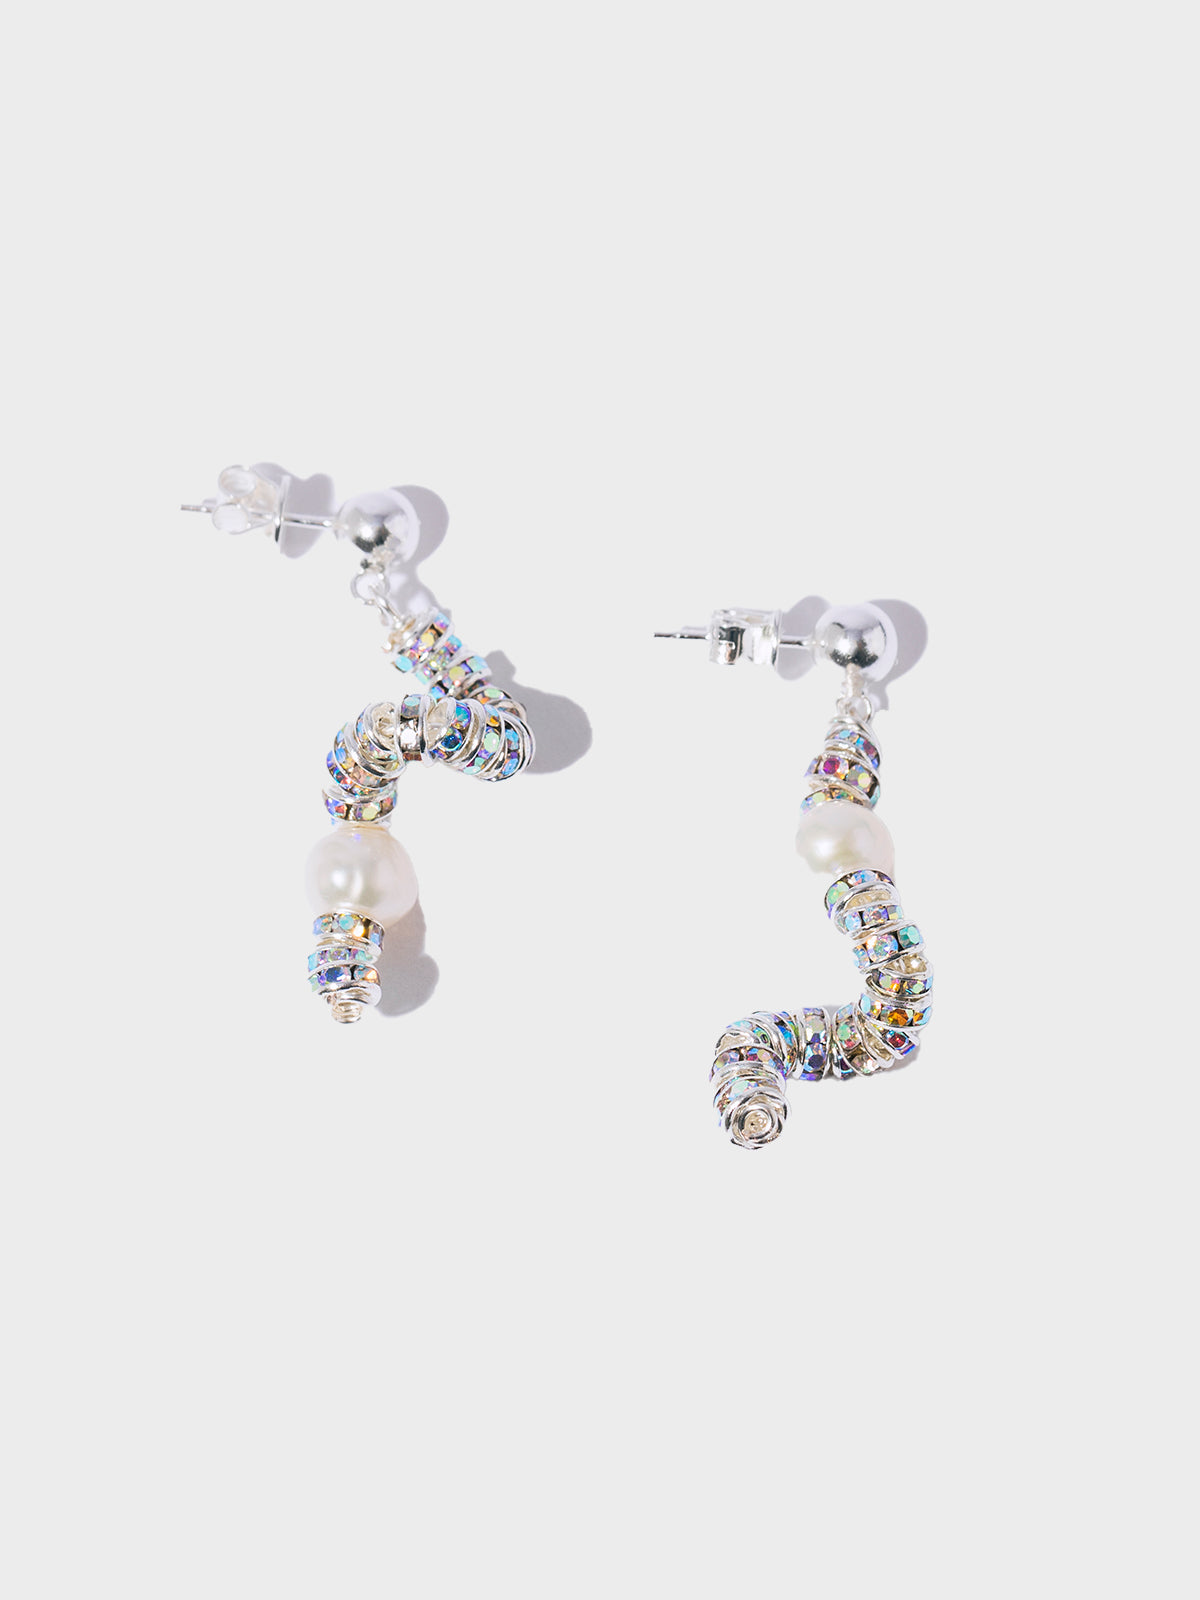 Pearl Octopuss.y - Tiny Snakes Earrings in Silver